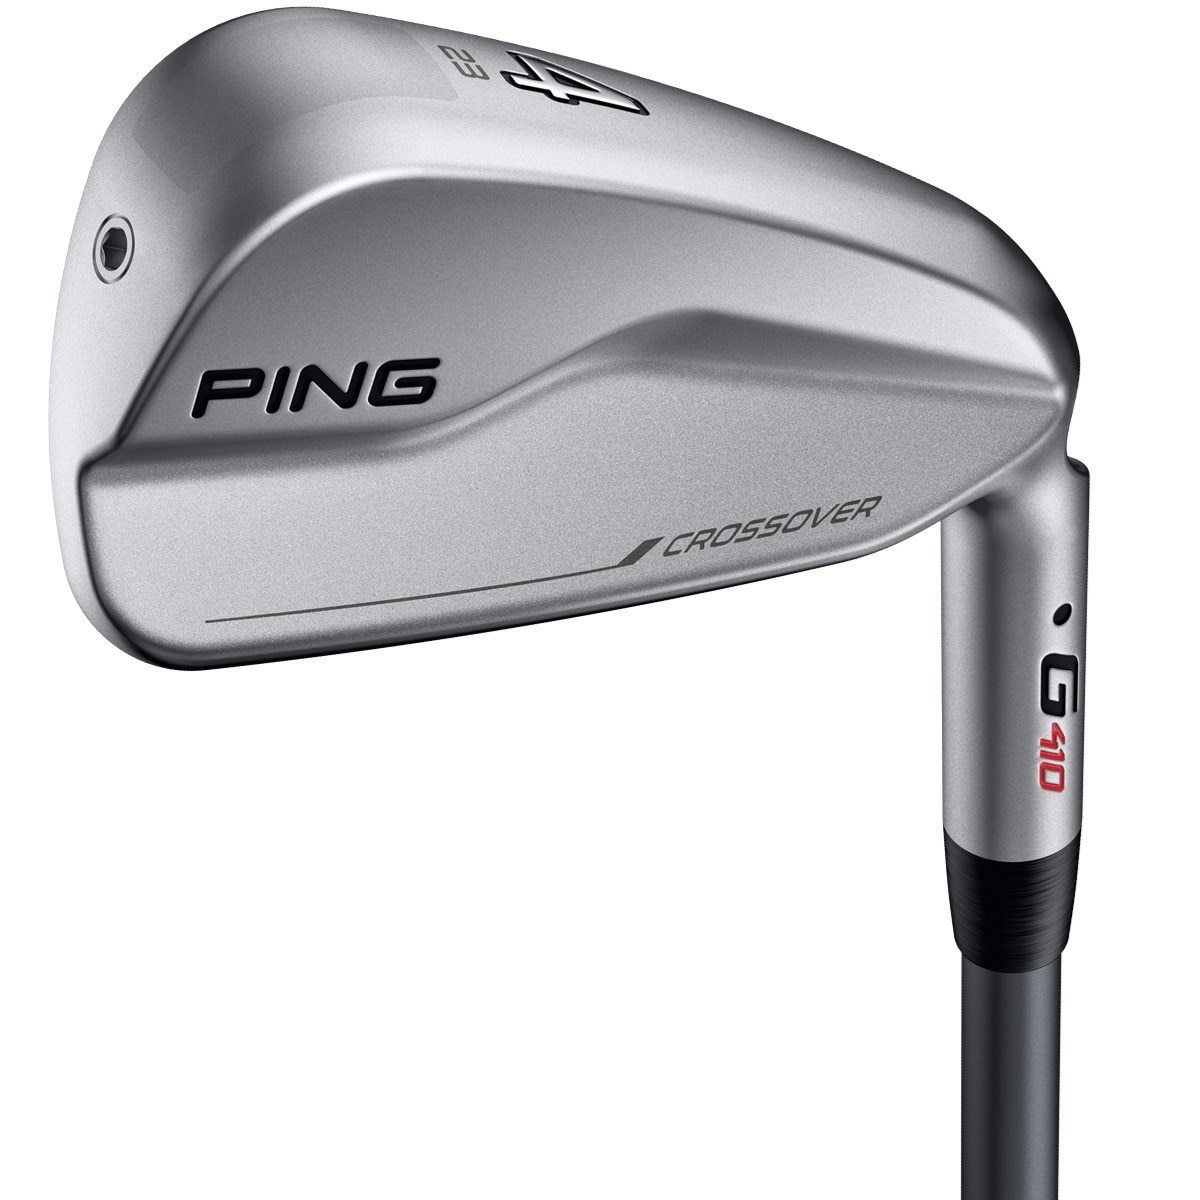 PING G410 4U CROSSOVER N.S.PRO950GHneo S